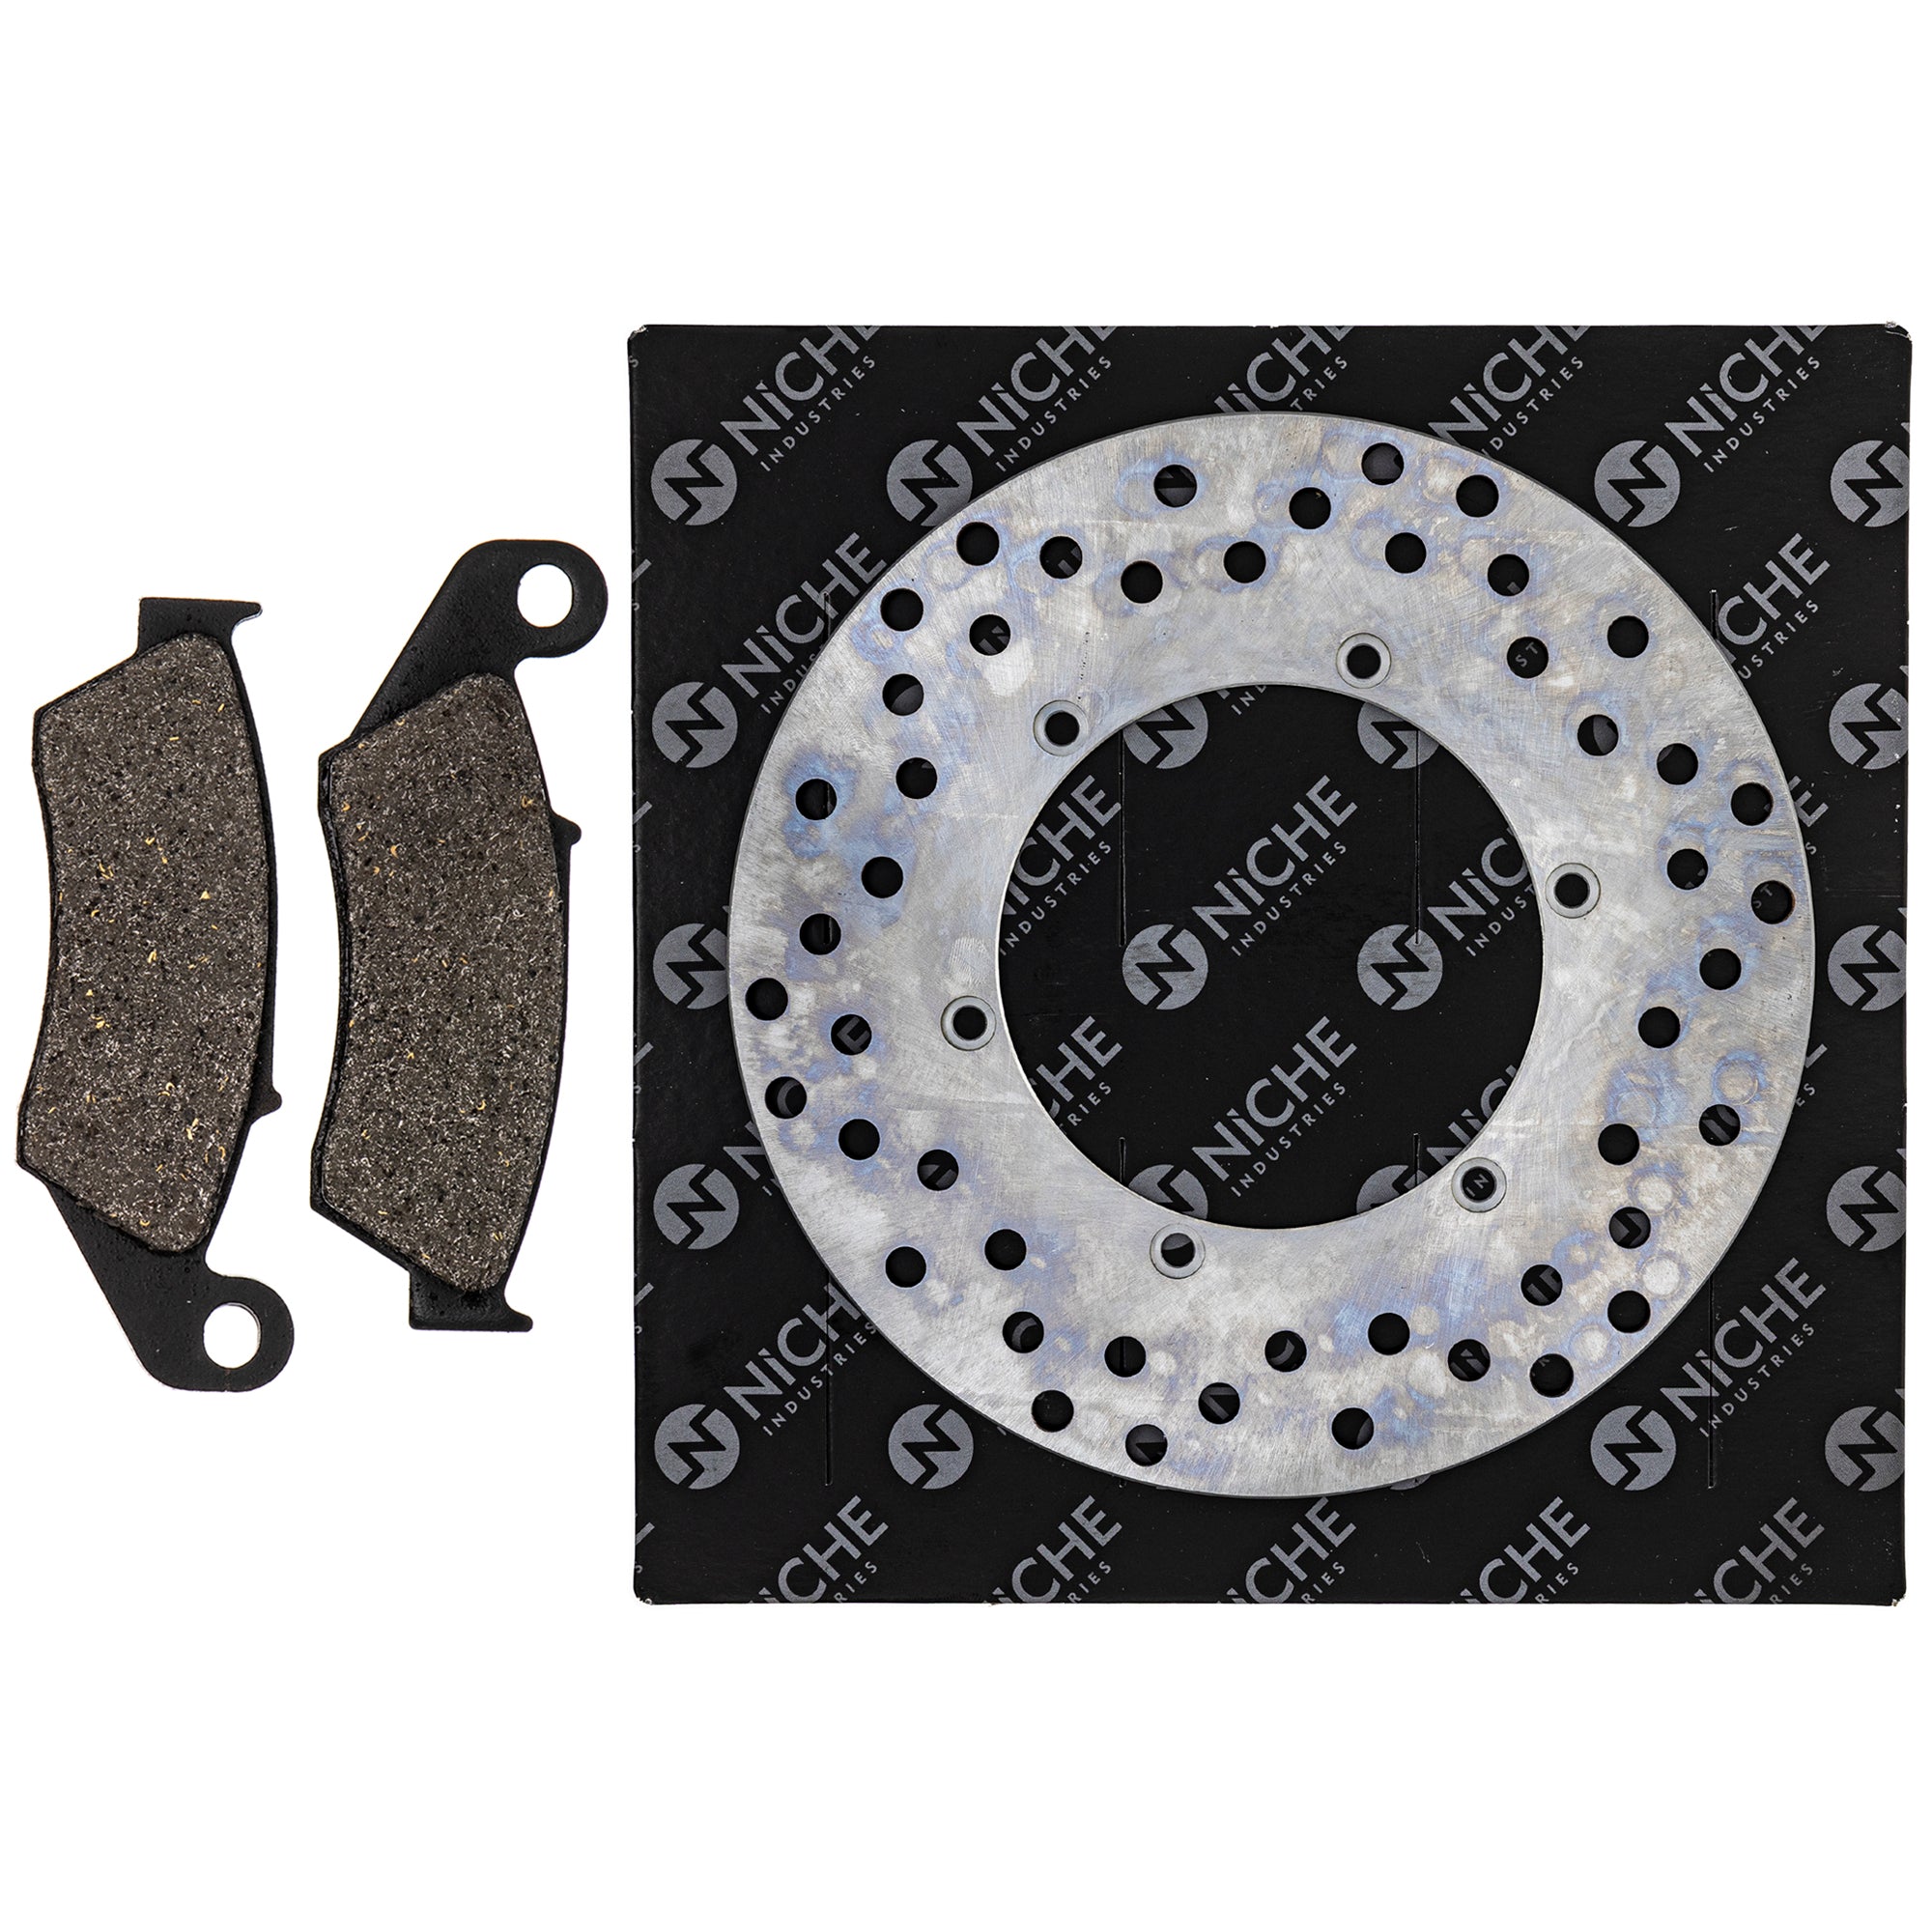 Front Brake Rotors and Pads Kit for zOTHER Triumph XR650L Transalp 45105-MY6-415 NICHE MK1006984